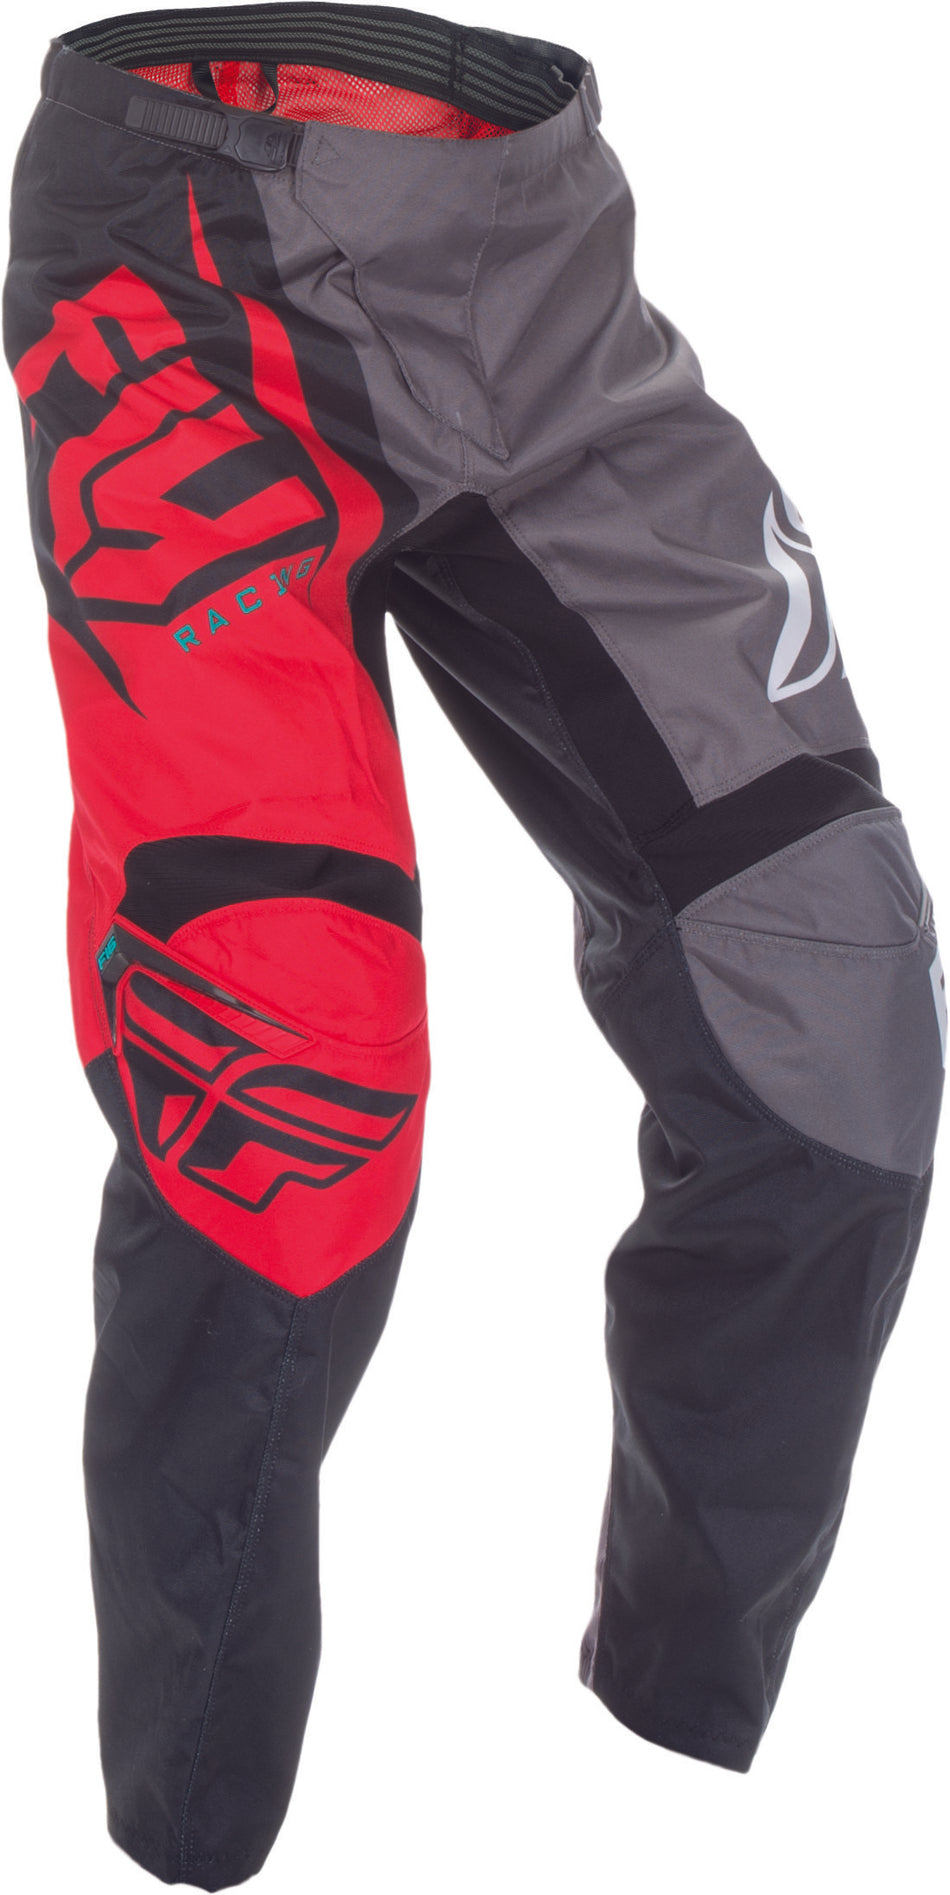 FLY RACING F-16 Pant Red/Black/Grey Sz 28 370-93228